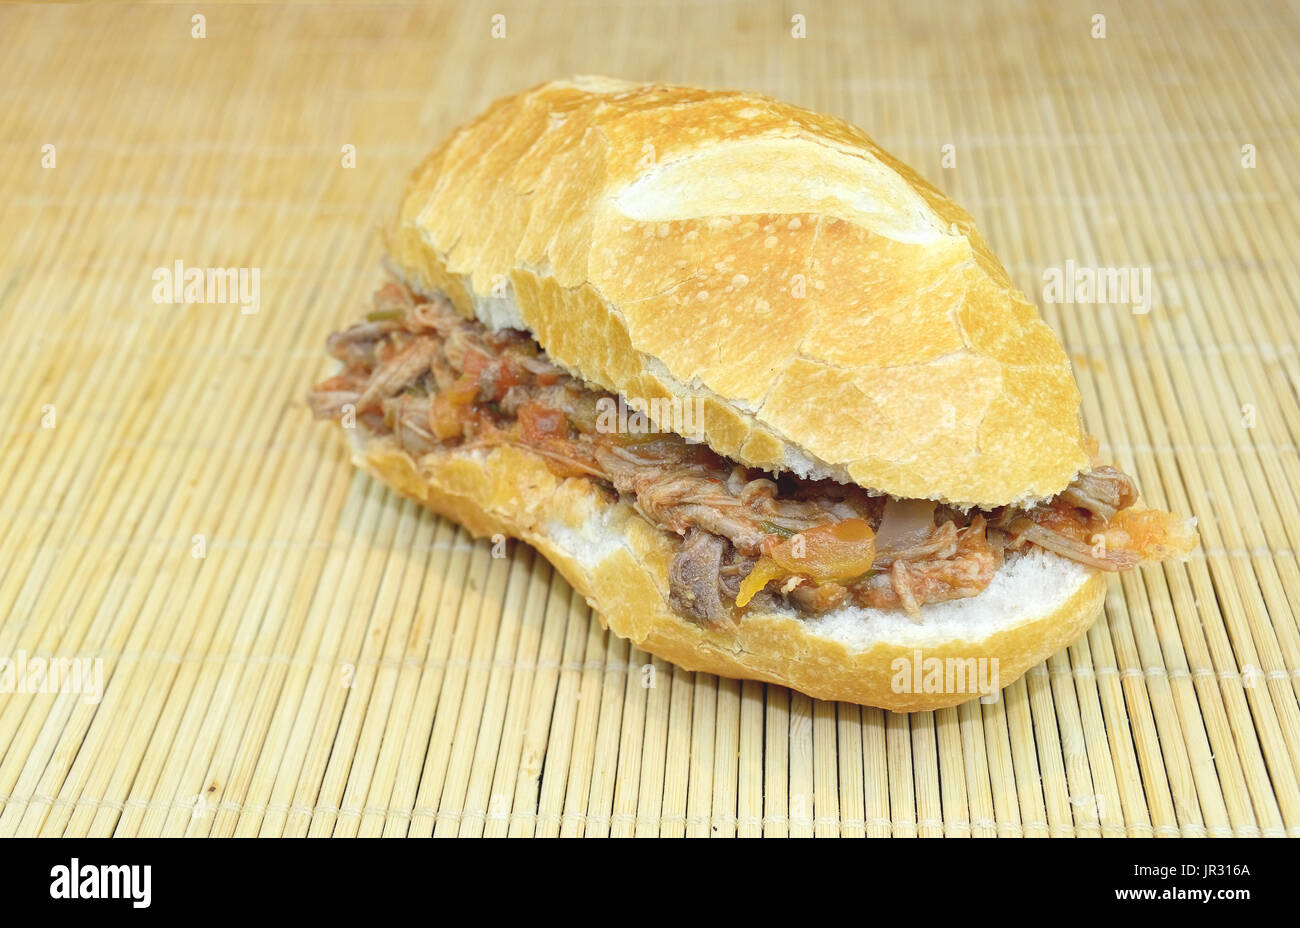 High Angle view of meat sandwich over a wood surface Stock Photo